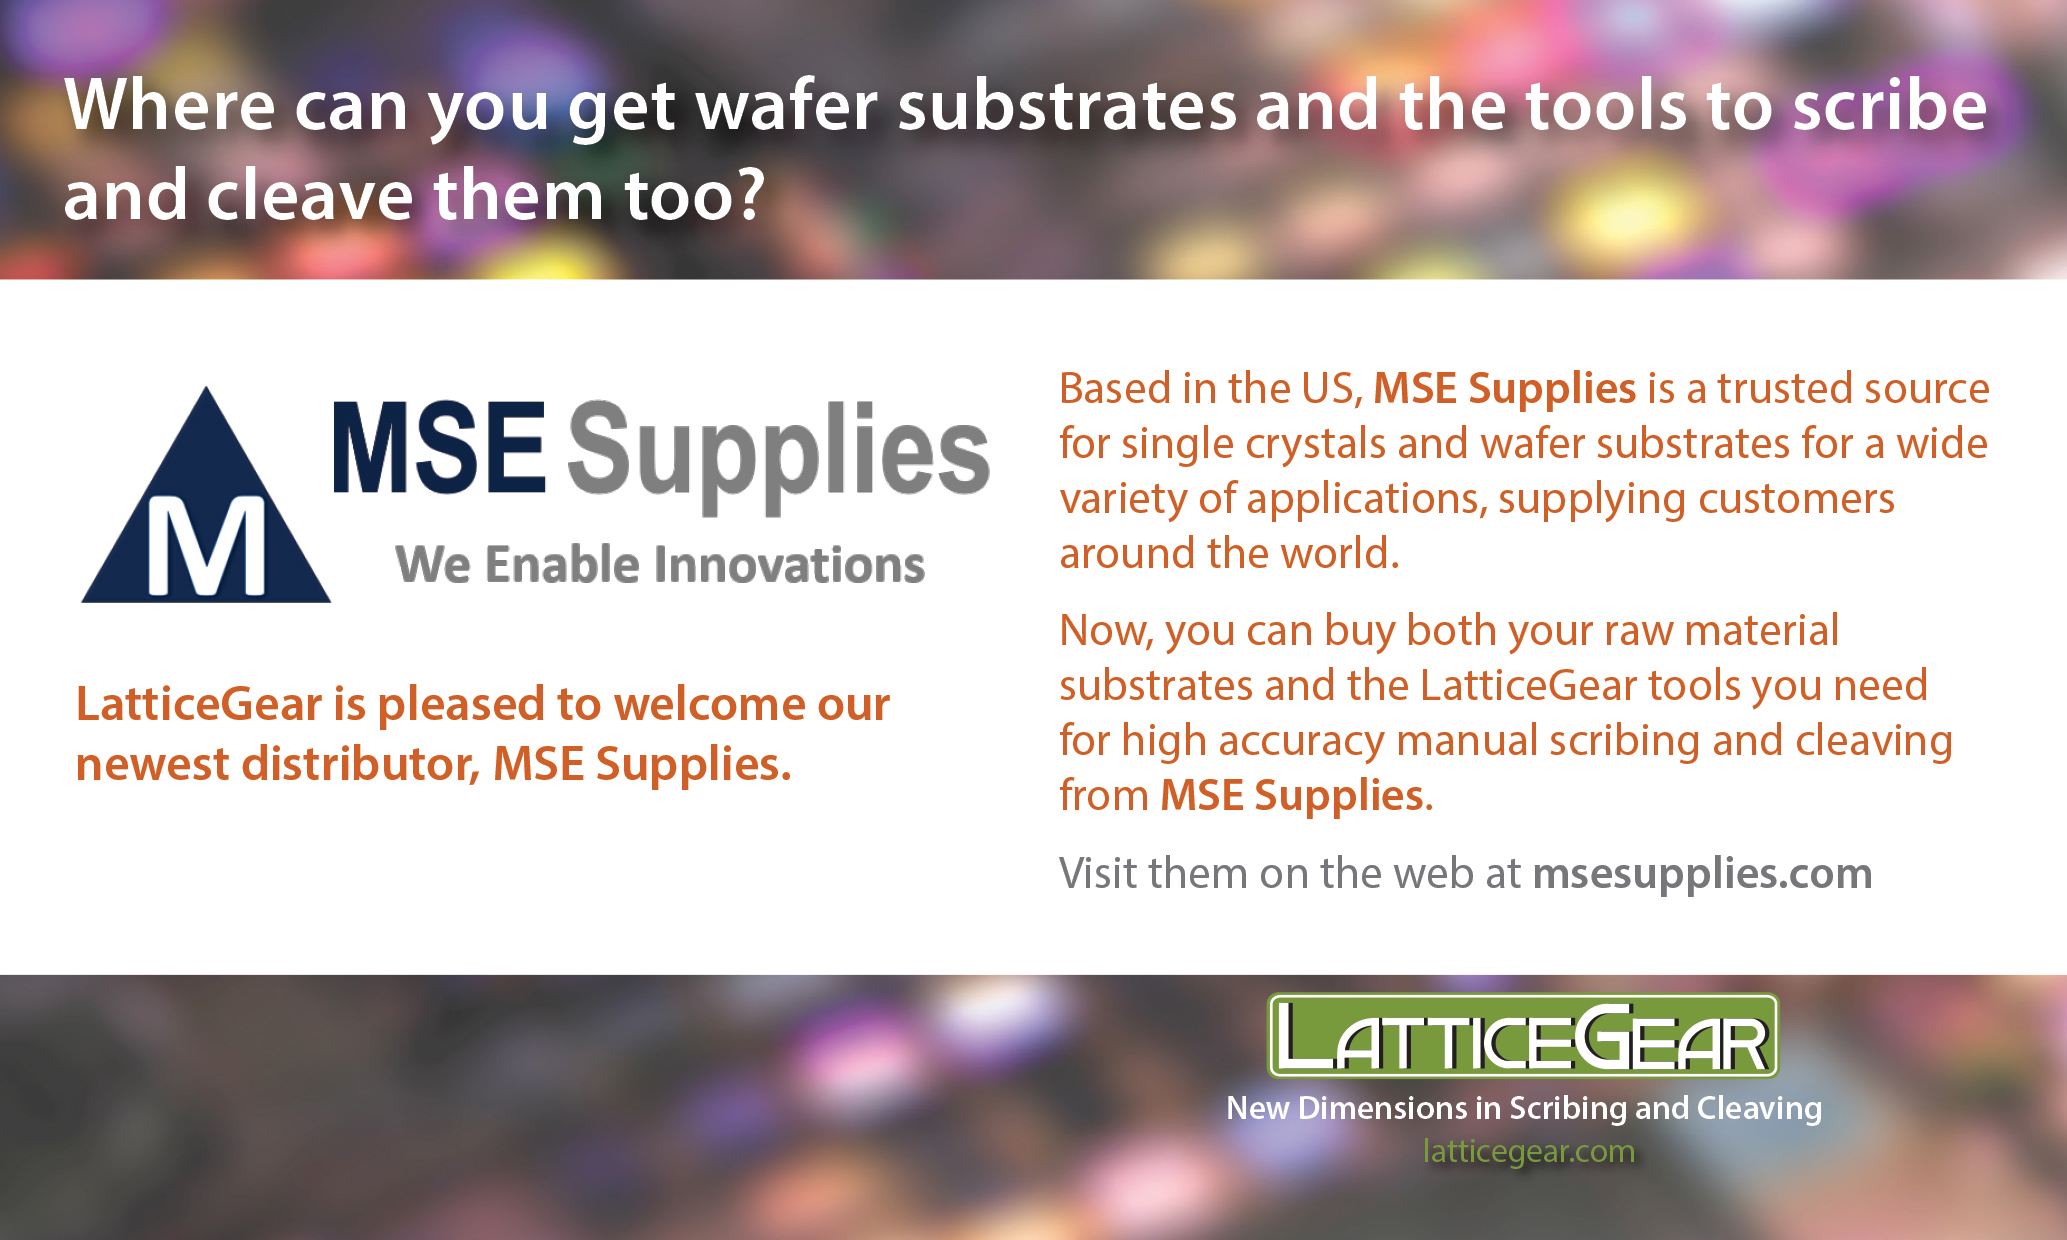 MSE and LatticeGear partner to provide wafers and scribing and cleaving tools